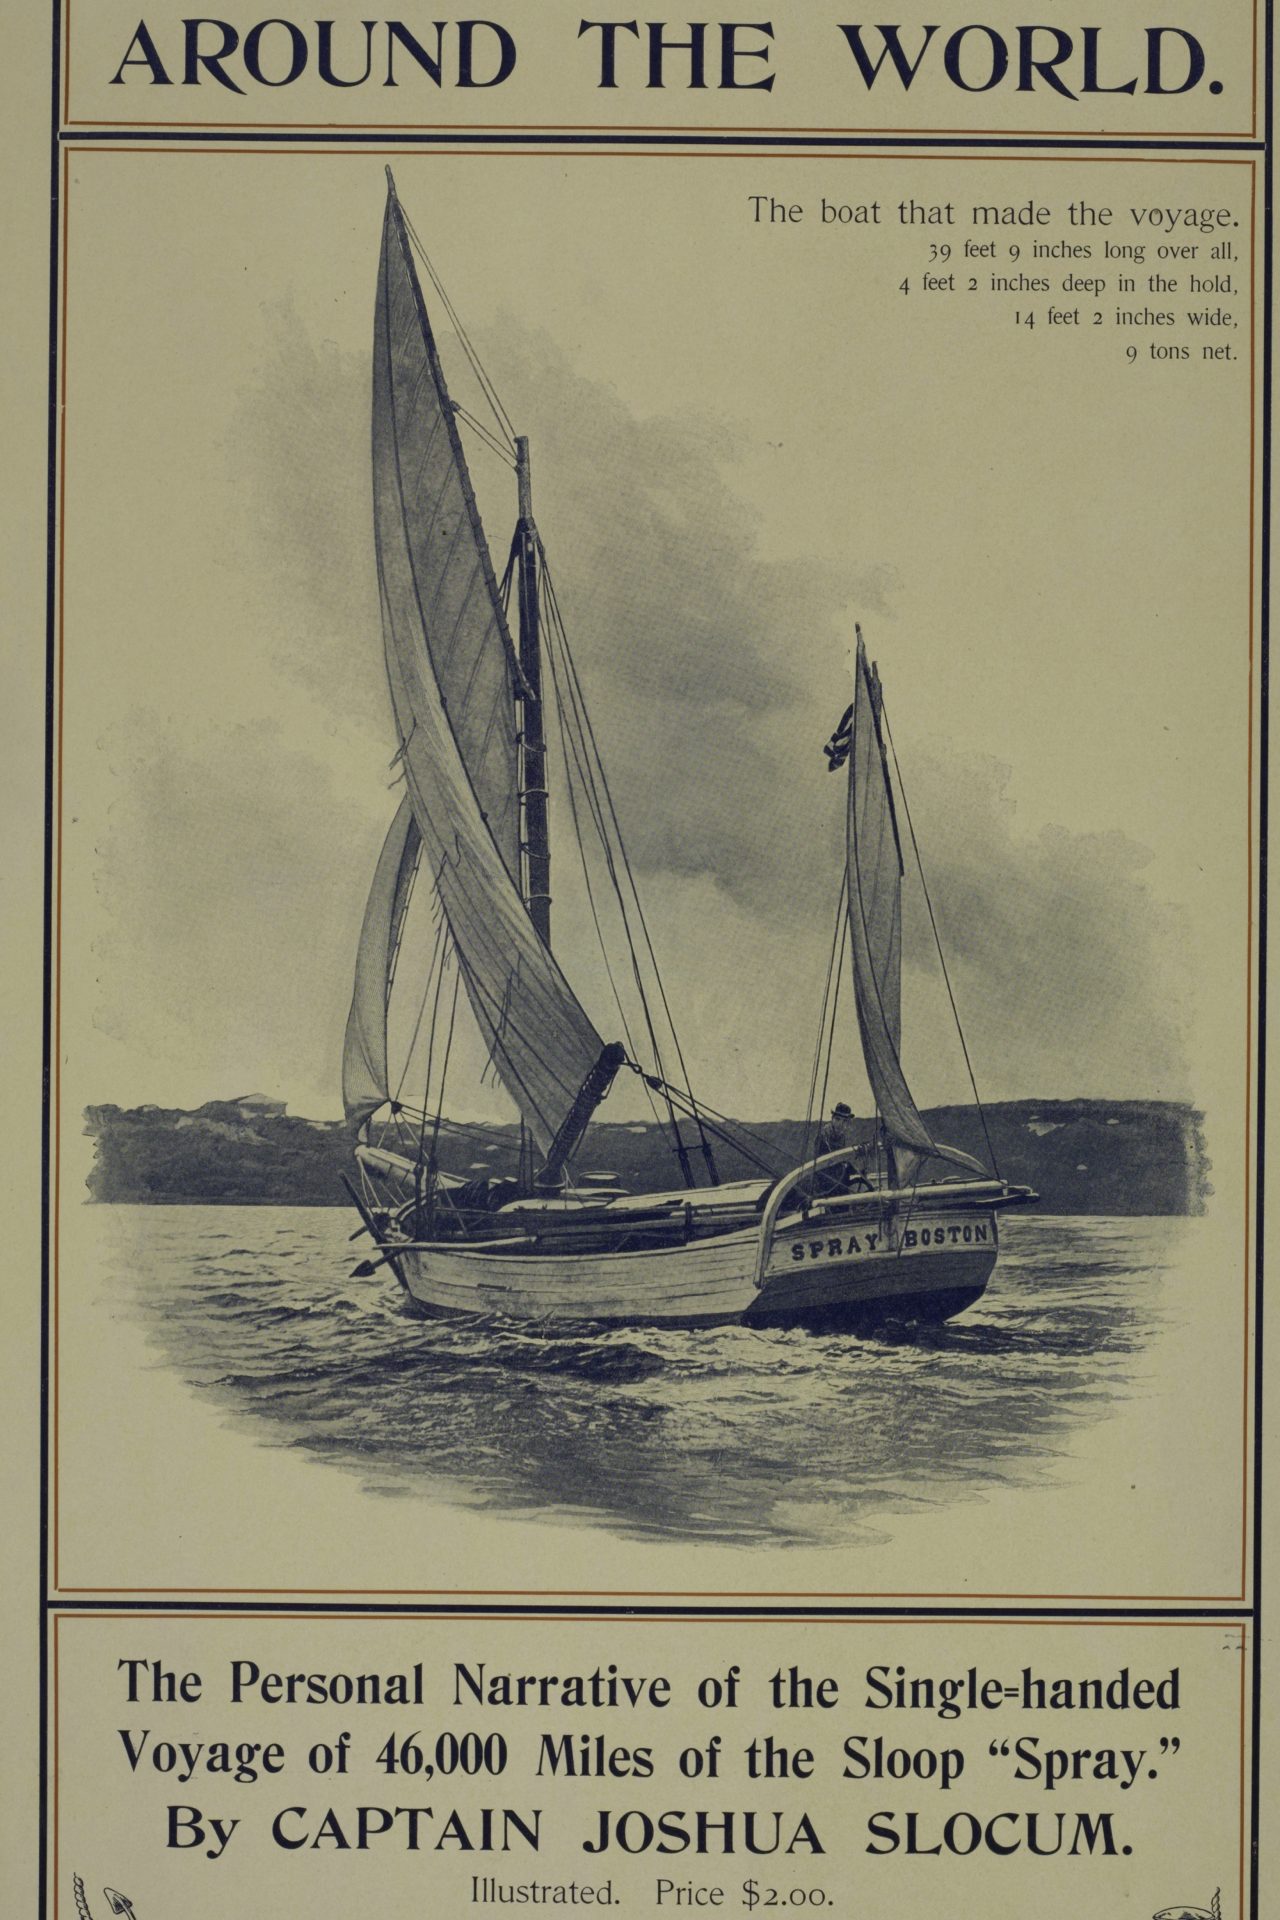 <p>Long-distance single-handed sailing became popular during the 19th century, as numerous sailors would achieve notable crossings of the Atlantic. Joshua Slocum was the first to single-handed circumnavigate the globe during his 1895-1898 voyage. Many sailors have since followed in his footsteps for leisure, glory, or fame.</p>